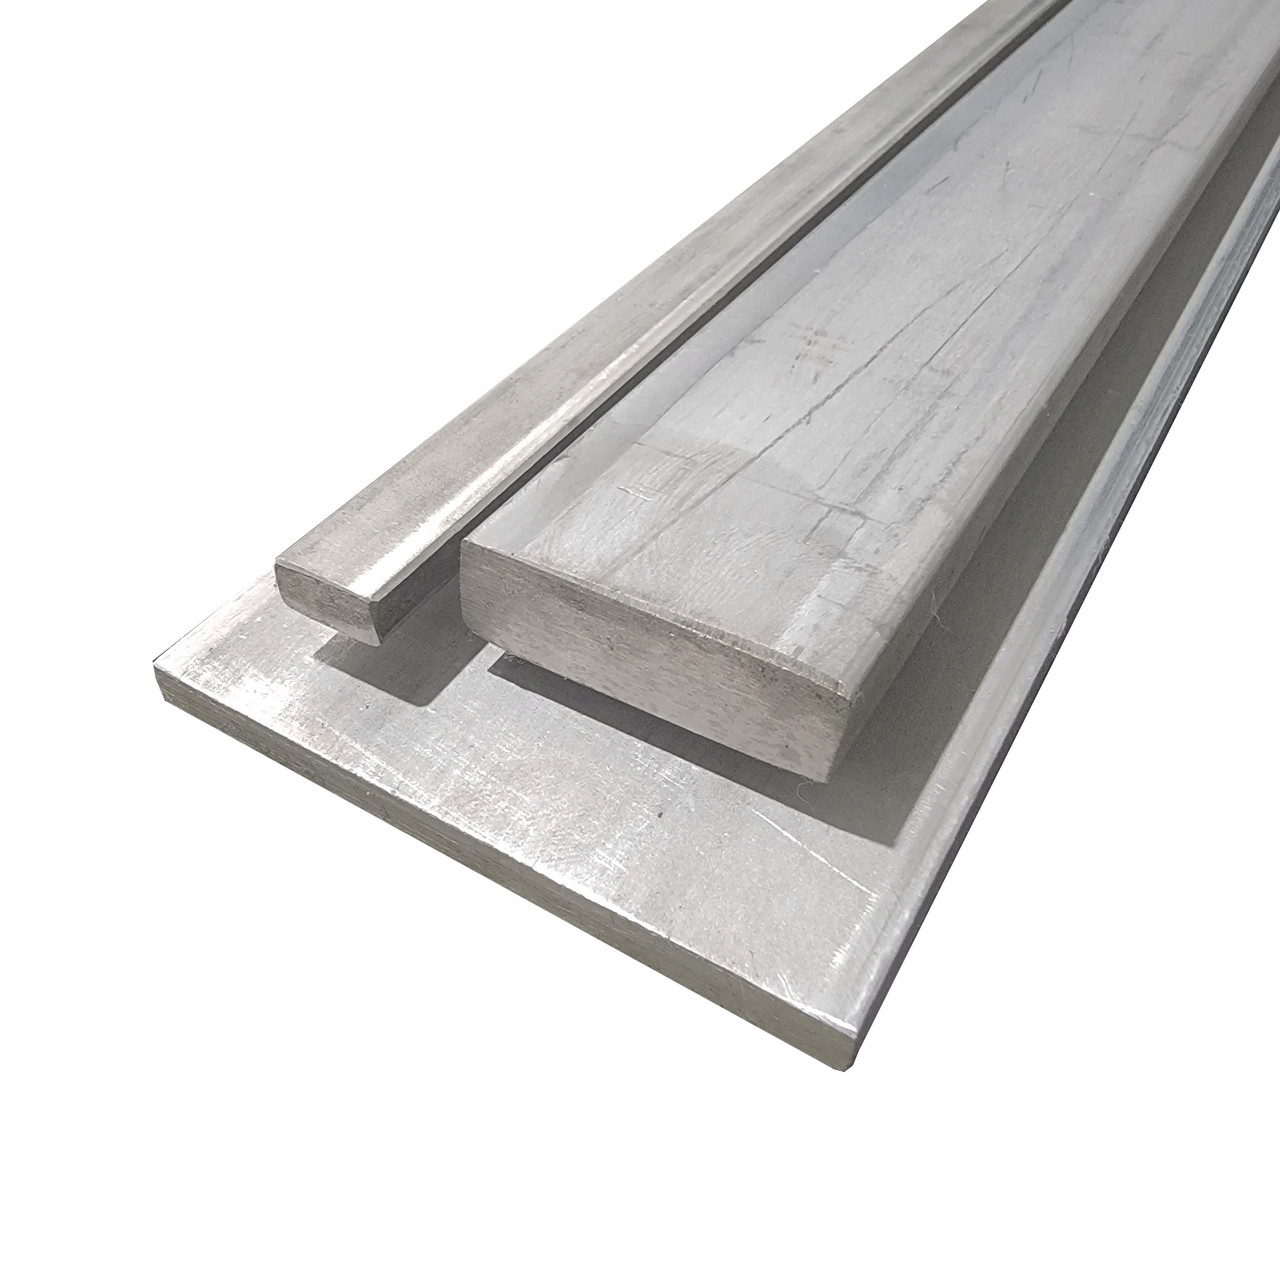 0.500" x 8" x 26", 304 Stainless Steel Plate Flat Bar, Hot Rolled